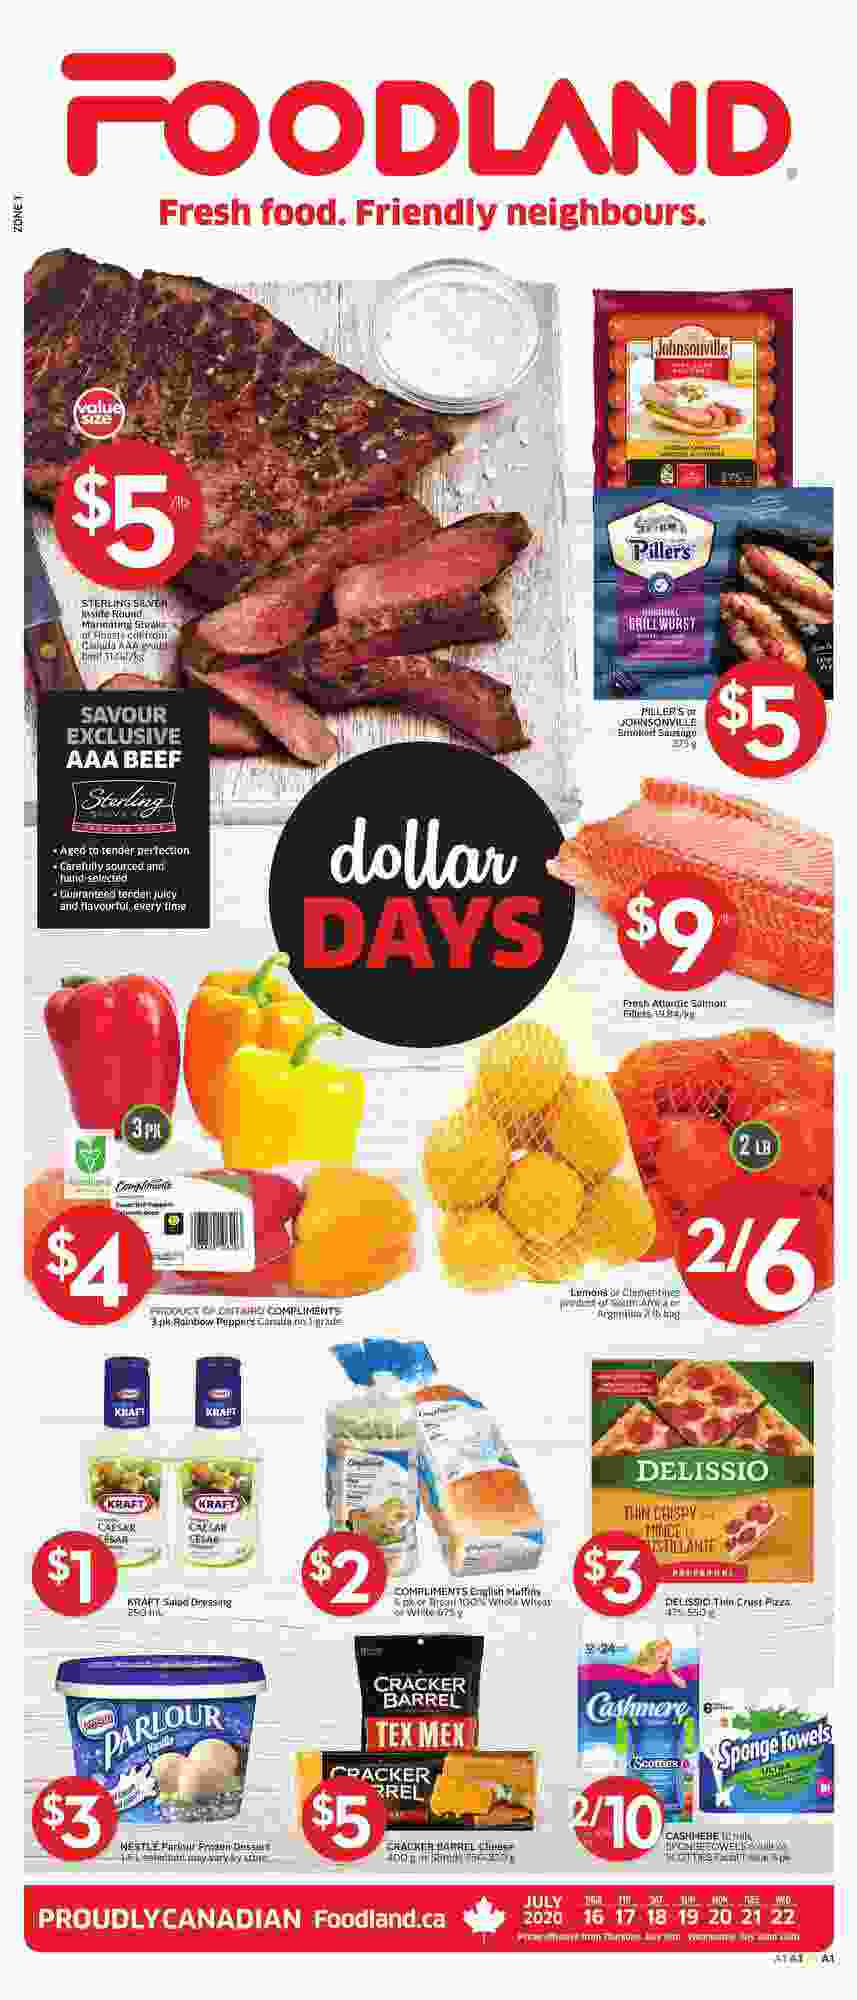 Foodland Ontario Flyer (ON) July 16 22 2020